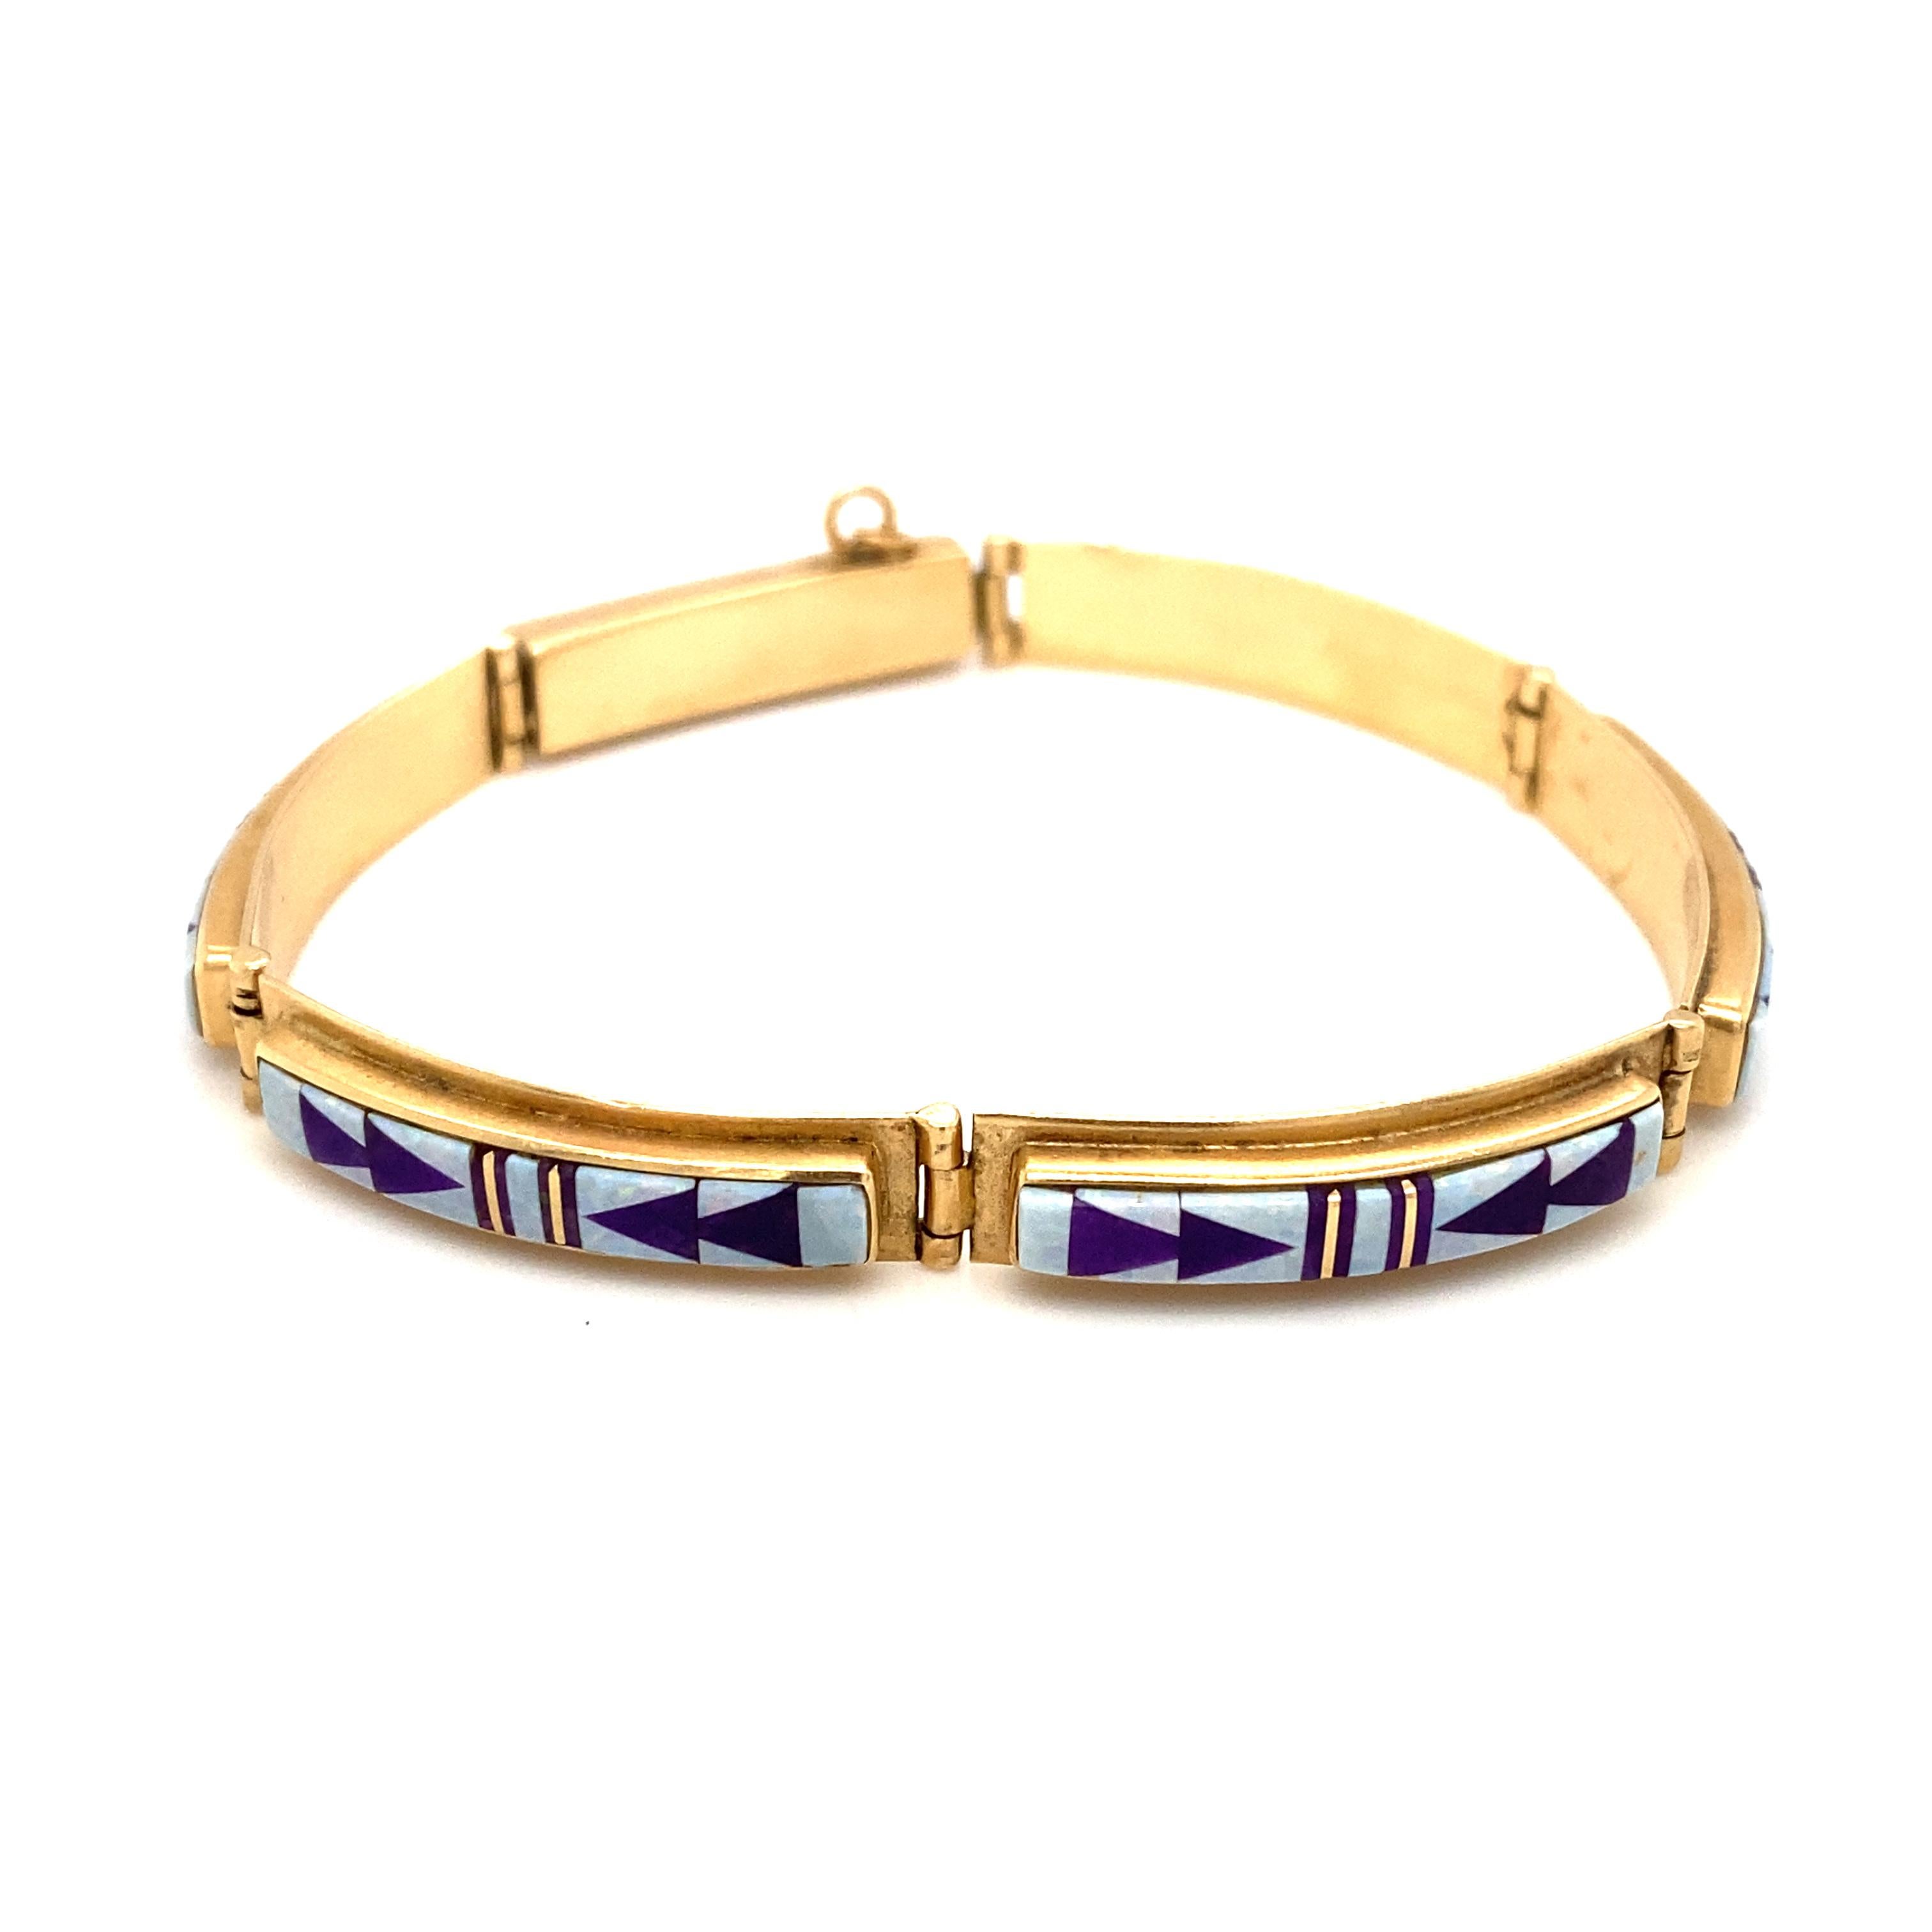 Item Details: This bracelet from Navajo artisans Rick Tolino and Wilbert Muskett has a beautiful panel design with opal and lapis inlay. Signed 